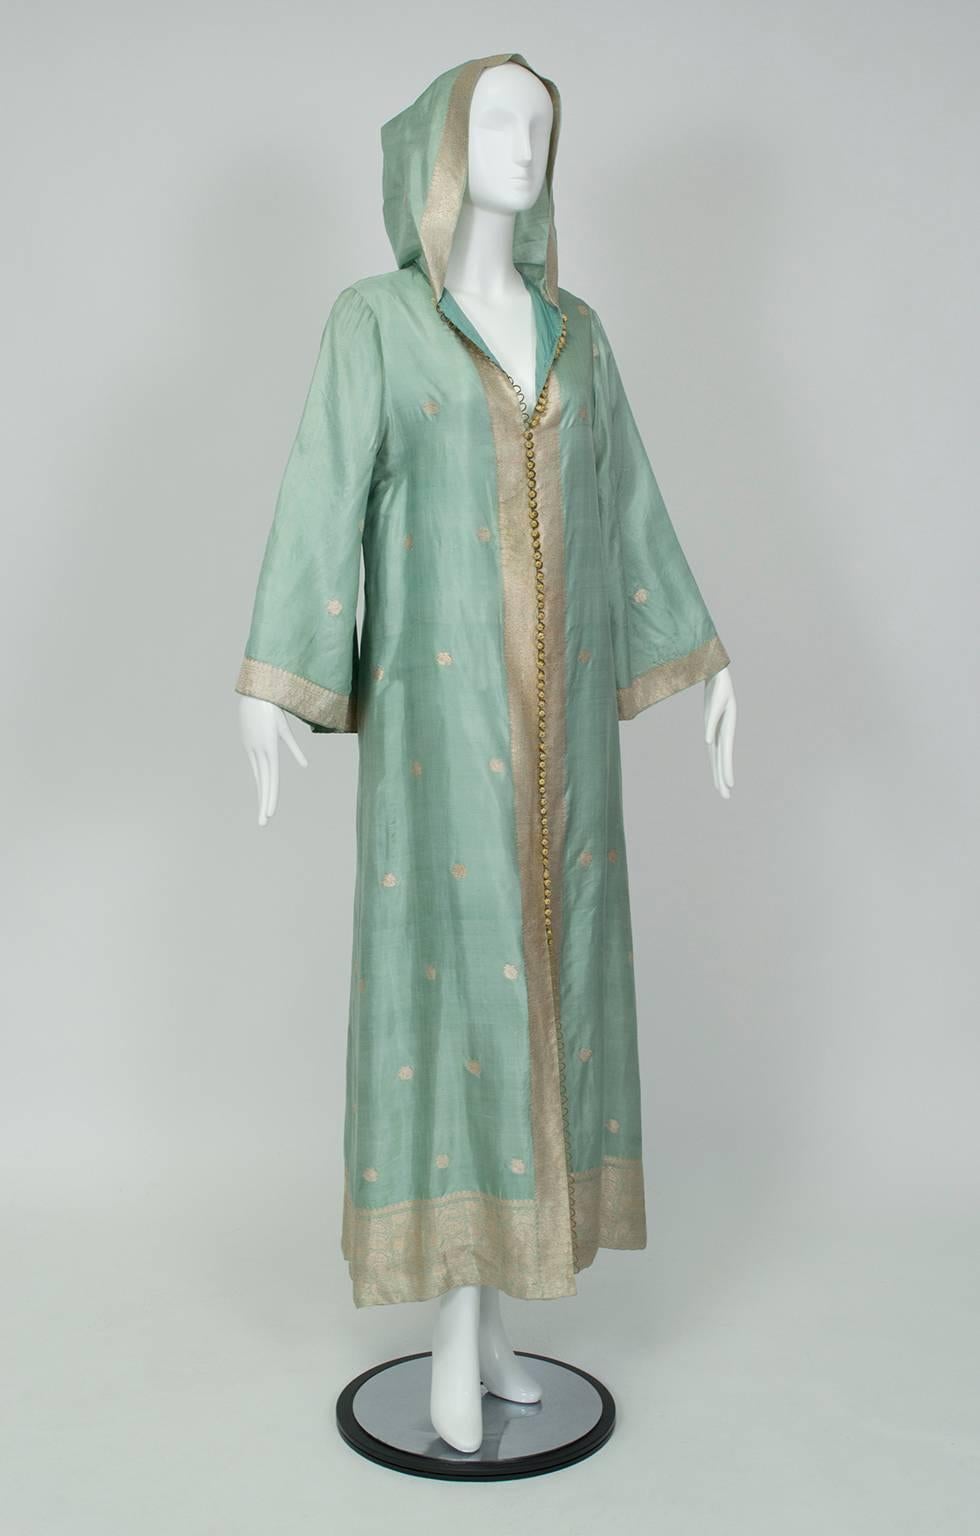 Hand-made in Tunisia from an Indian silk sari, this kaftan was originally owned by the wife of a State Department ensign in the Nixon administration.  Still not impressed?  She wore it to tea with Prince Karim Aga Khan IV.  That should do